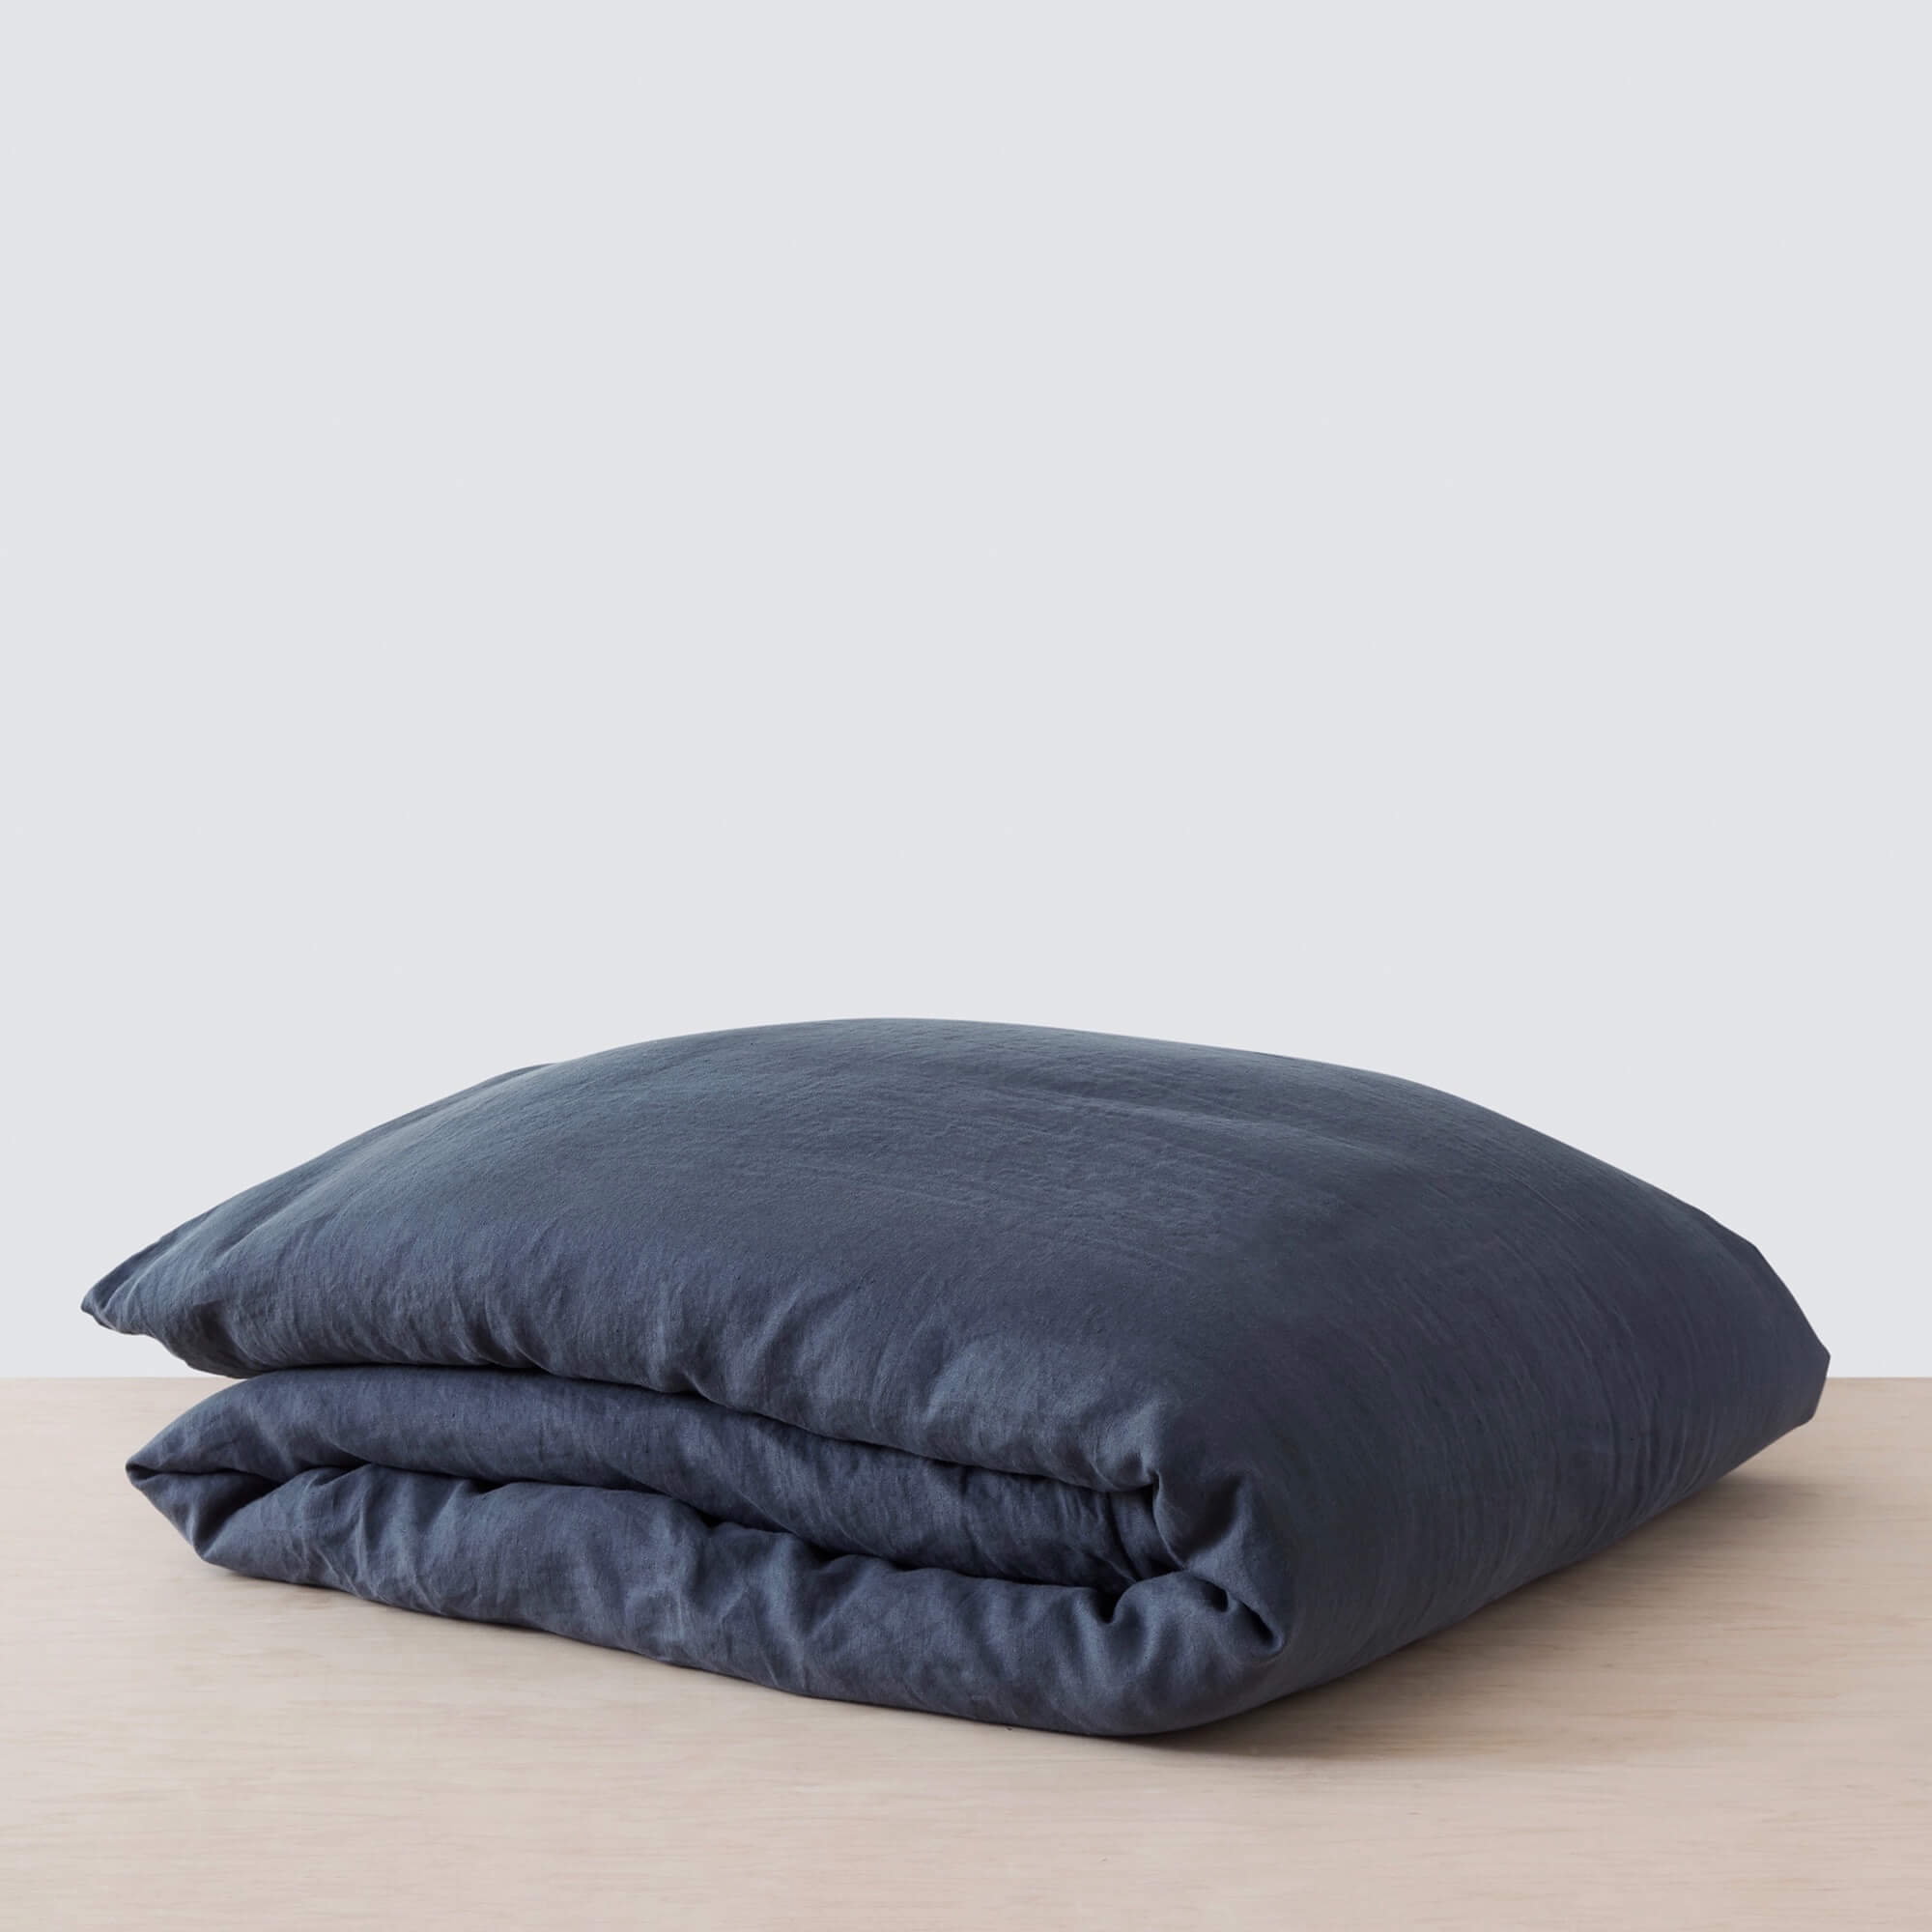 The Citizenry Stonewashed Linen Duvet Cover | King/Cal King | Duvet Only | Solid Sand - Image 10